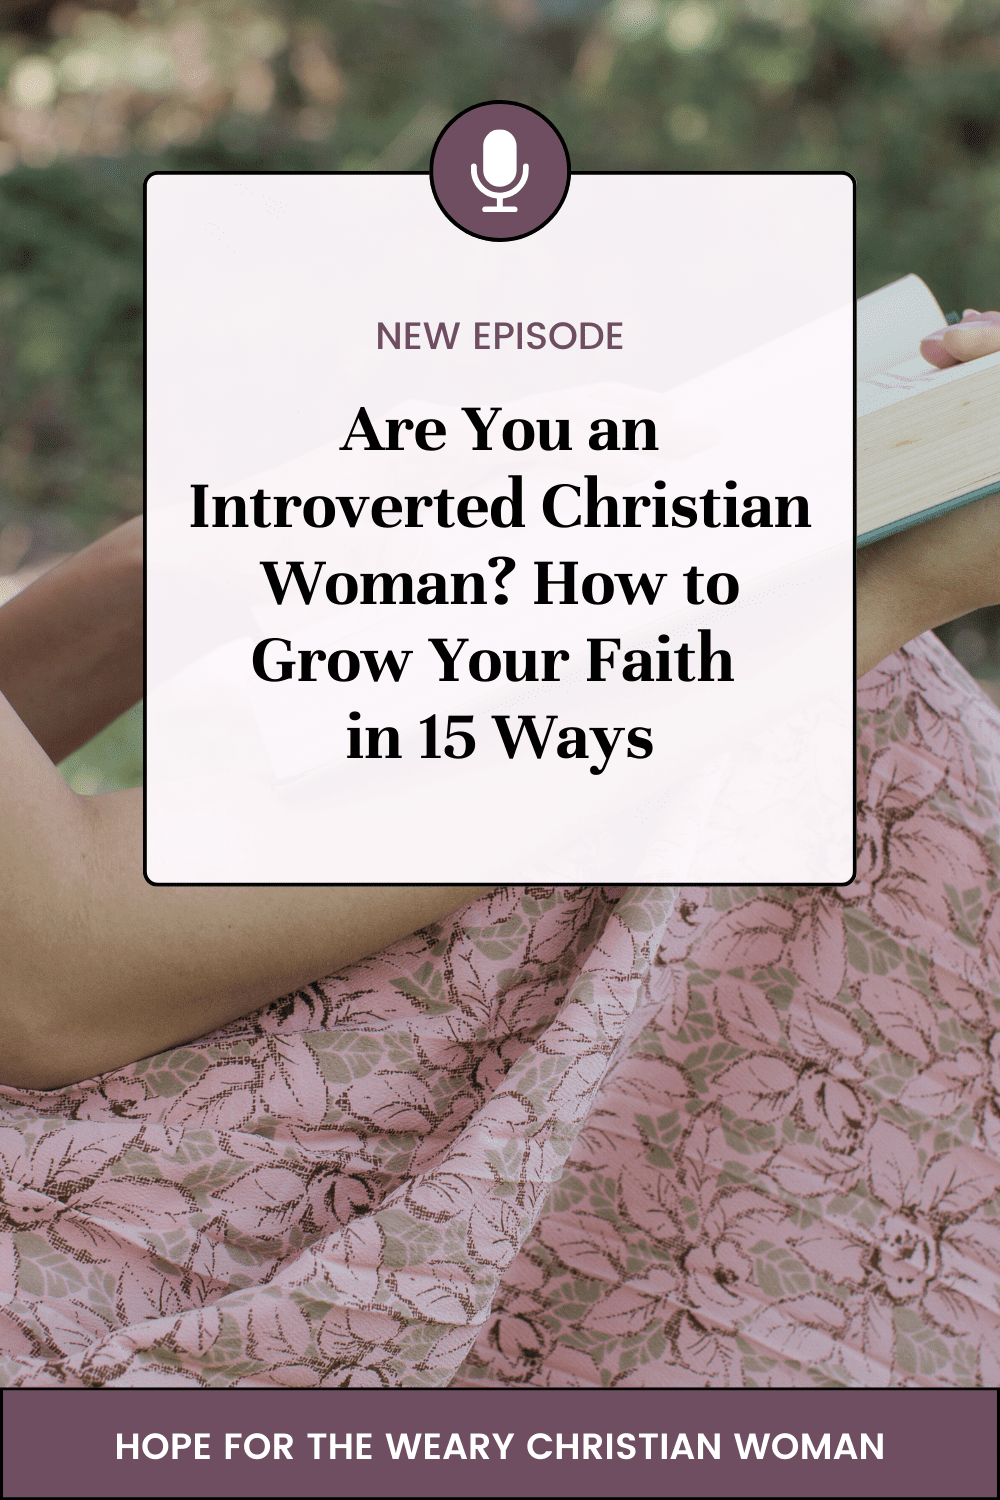 Unsure how to grow your faith as a highly sensitive introverted Christian woman? Learn 15 ways to grow closer to God - without having to do things that don't work well for you. Plus, quiet time tips to help you get started. via @womenfindinggod